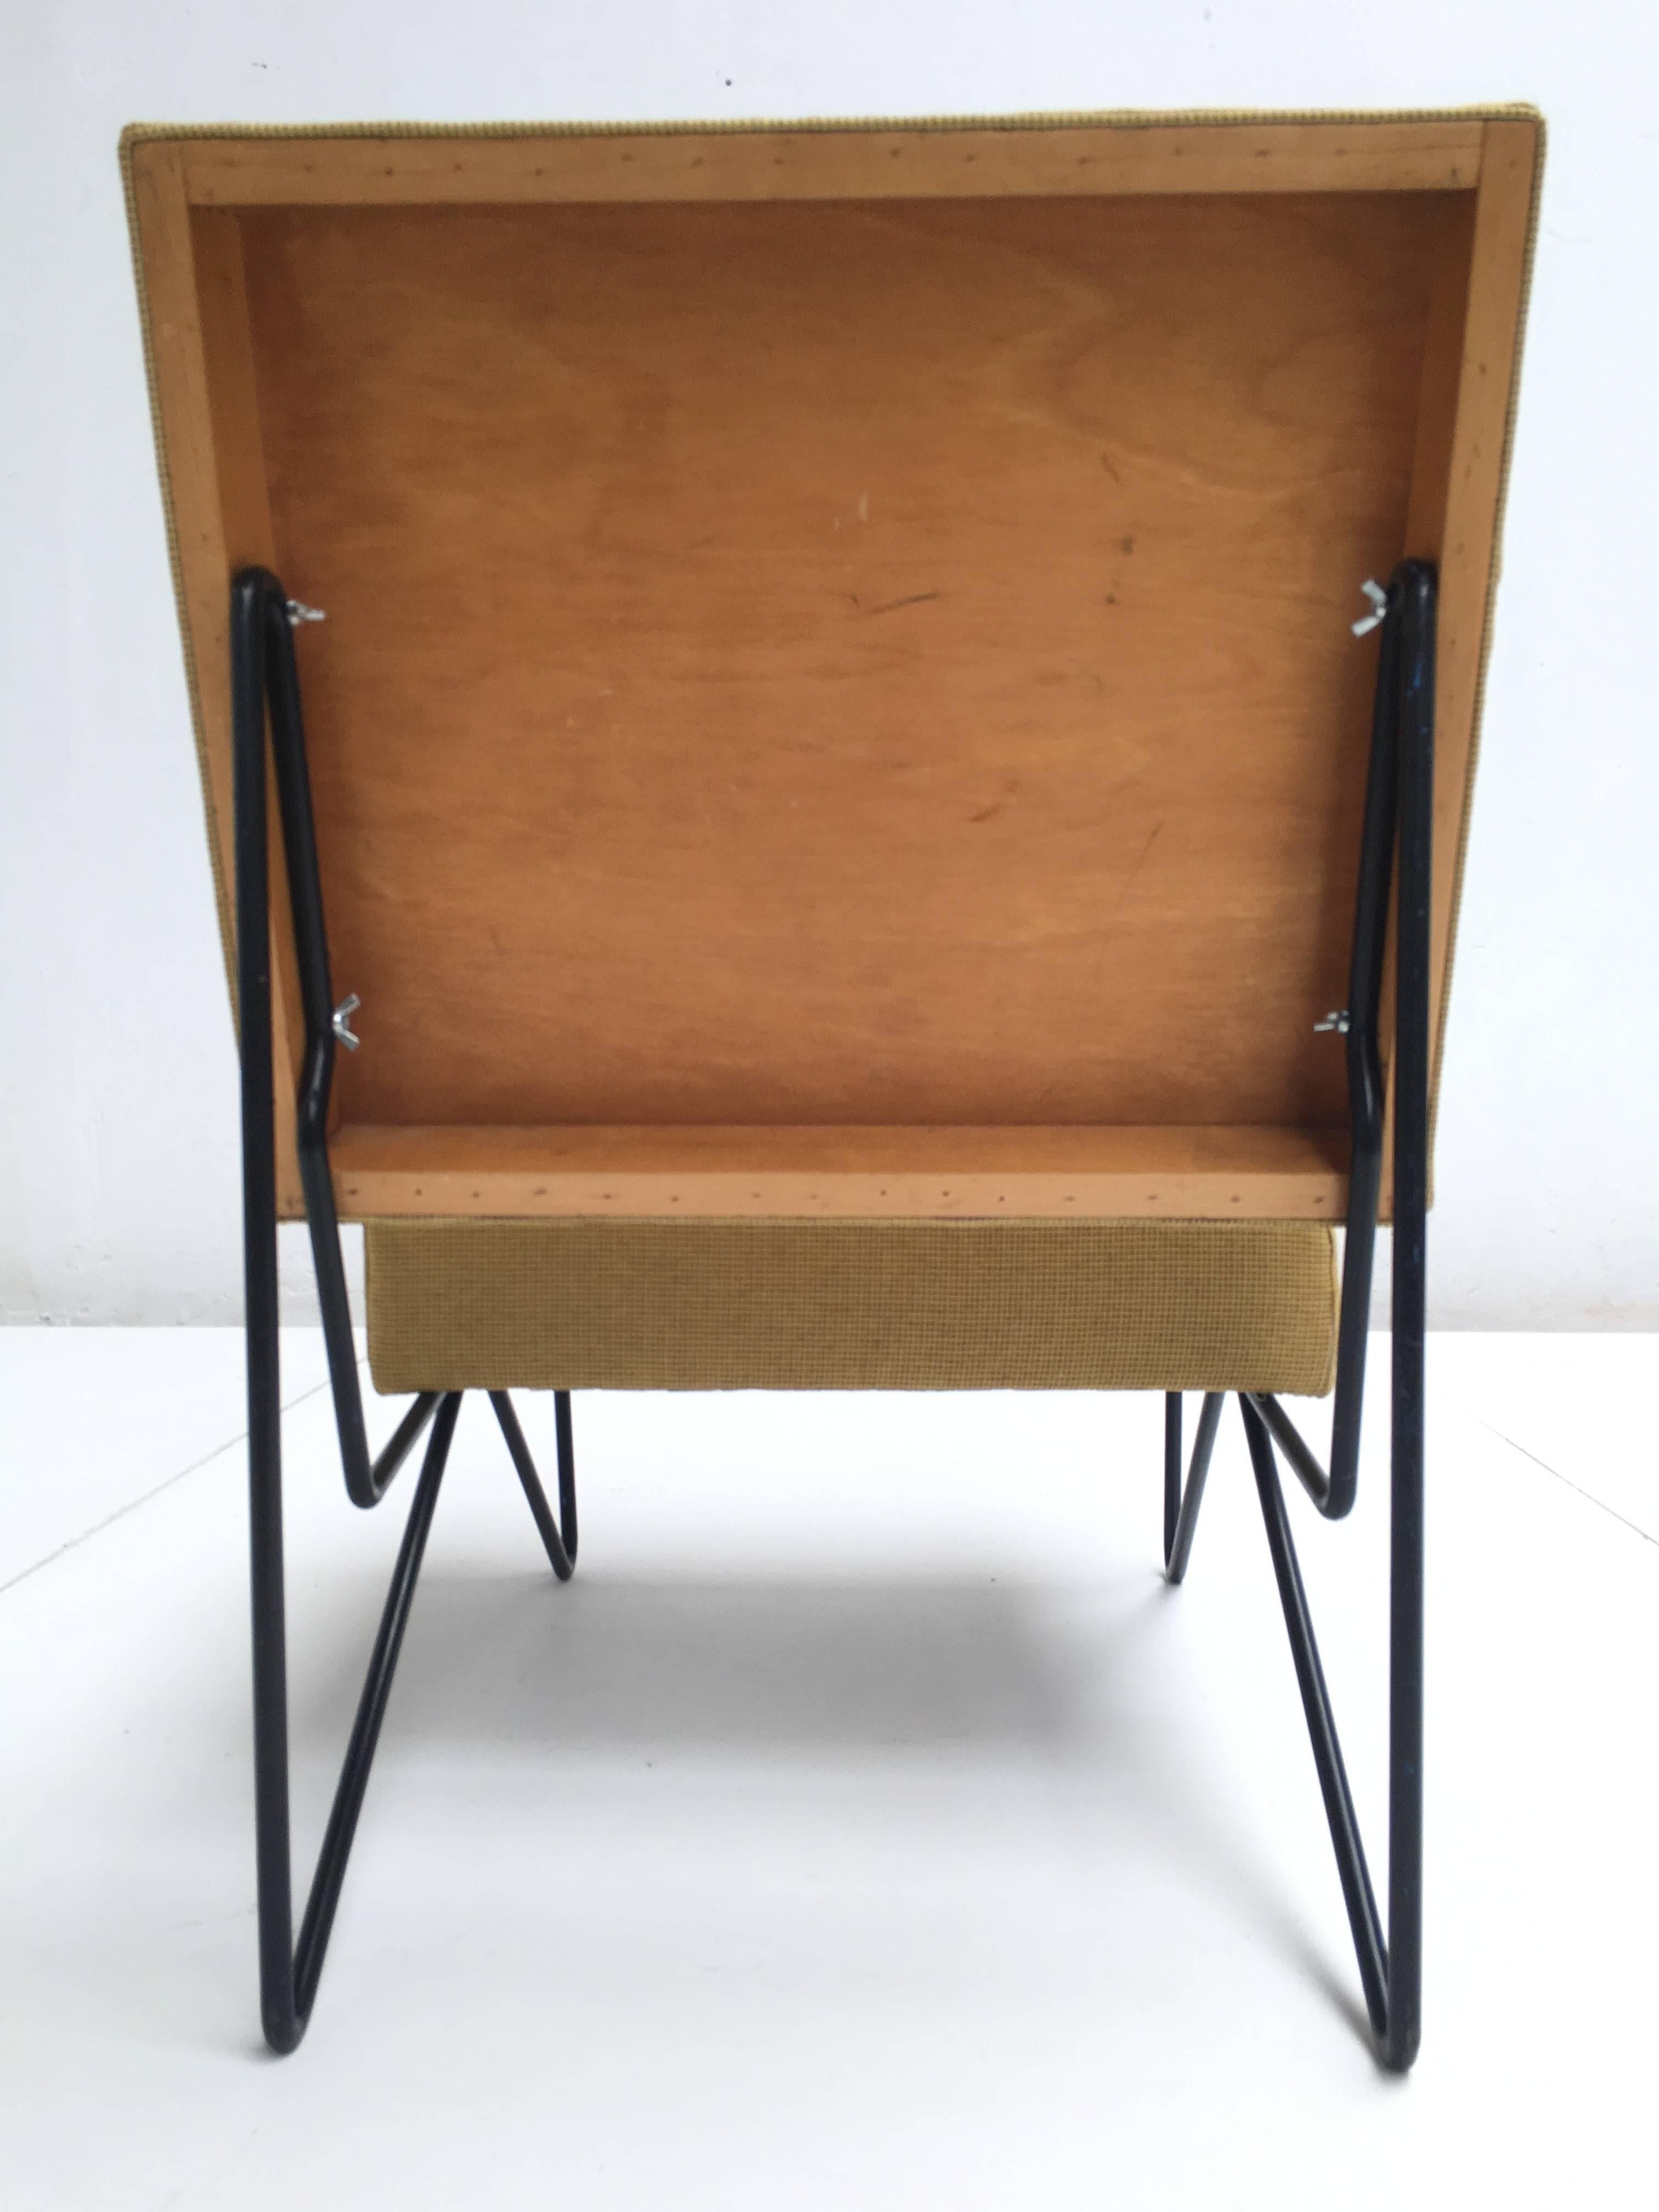 Dutch Modernist Cees Braakman FM03 Combex Lounge Chair for UMS Pastoe 1953 Restored